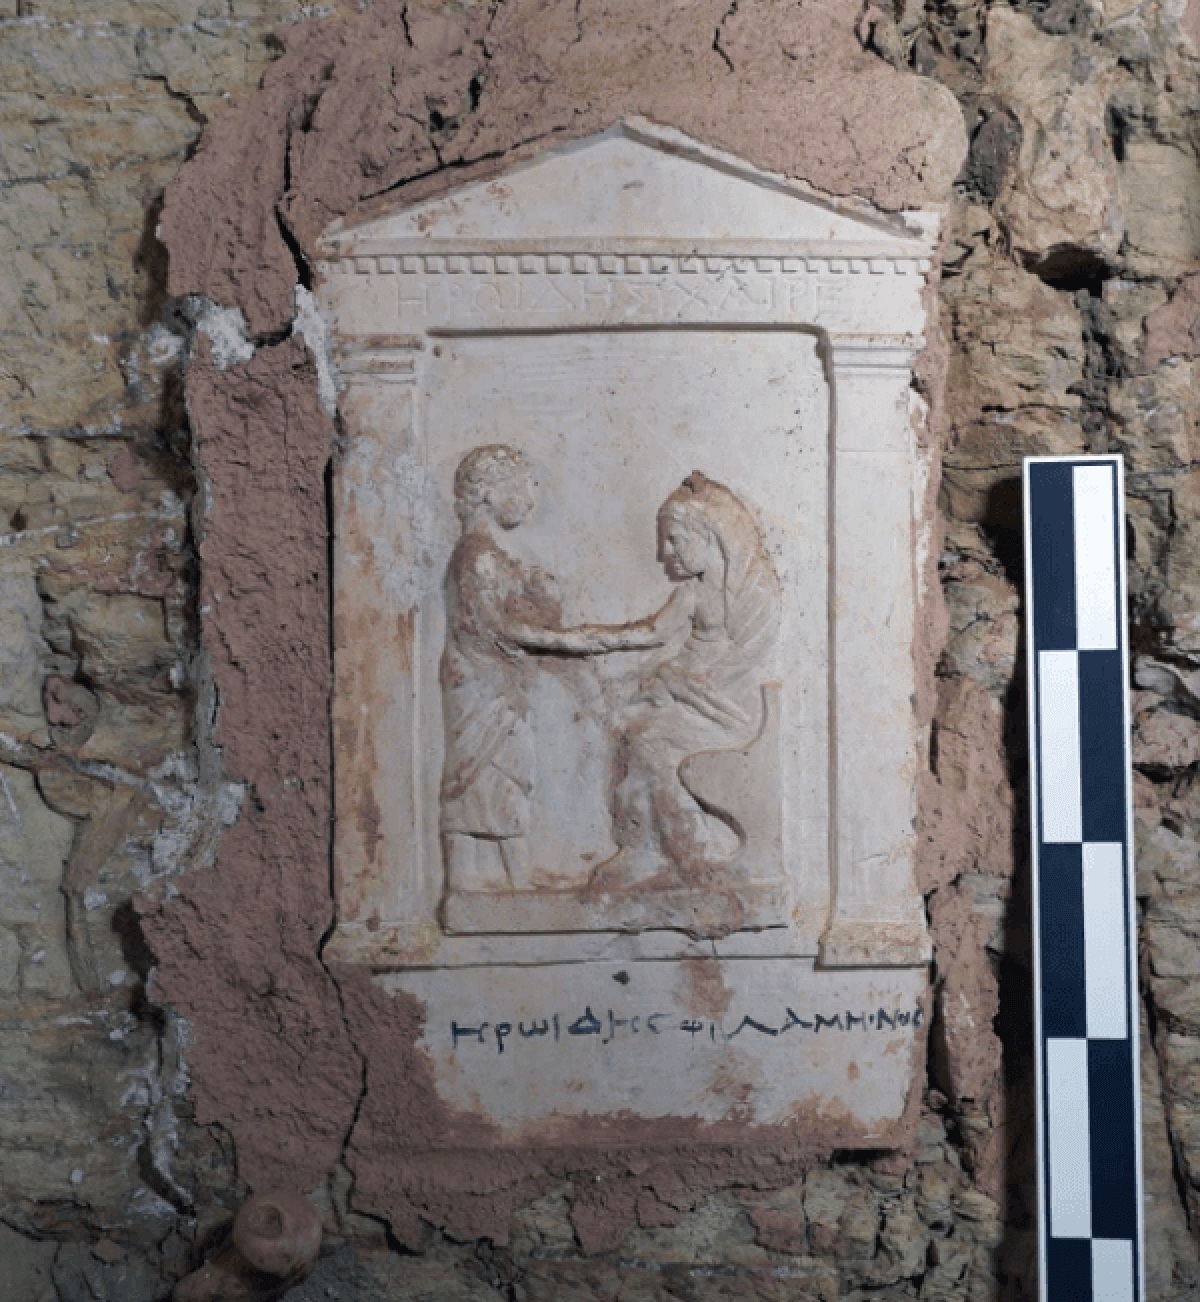 A 4,500-year-old tomb with artifacts and a child's skeleton was found in Egypt